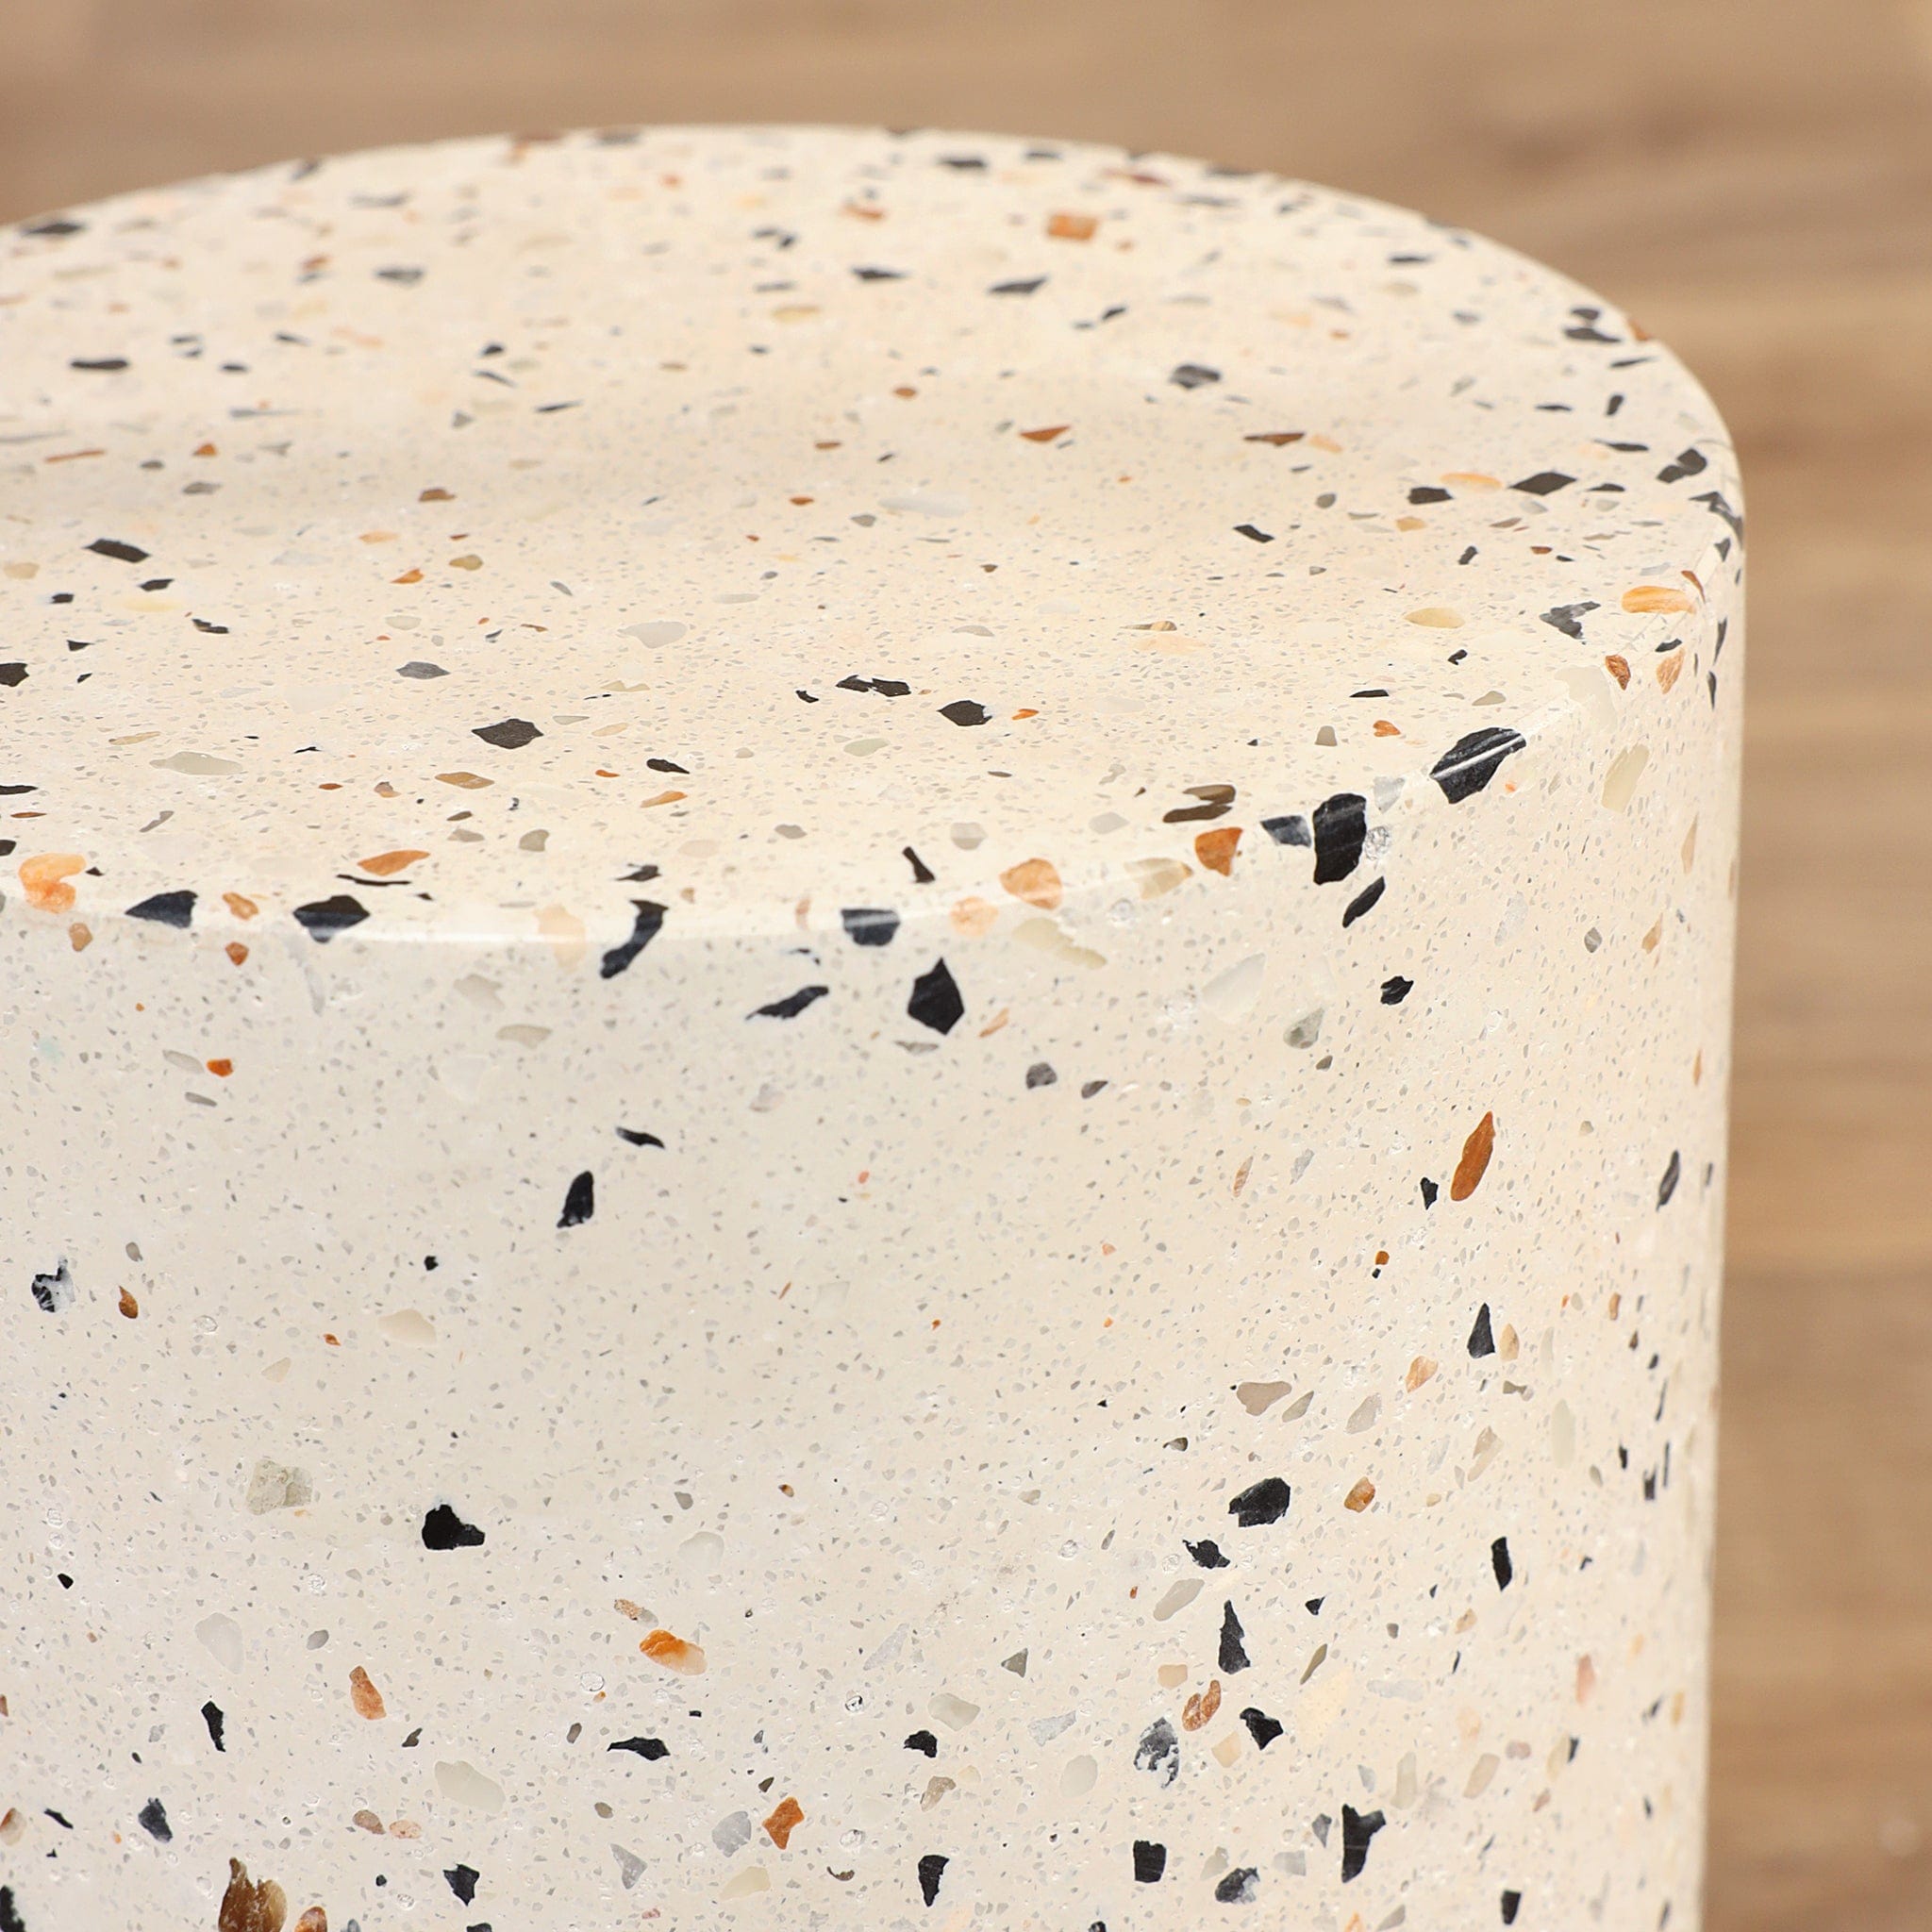 Gill <br>Terrazzo Side Table - Bloomr